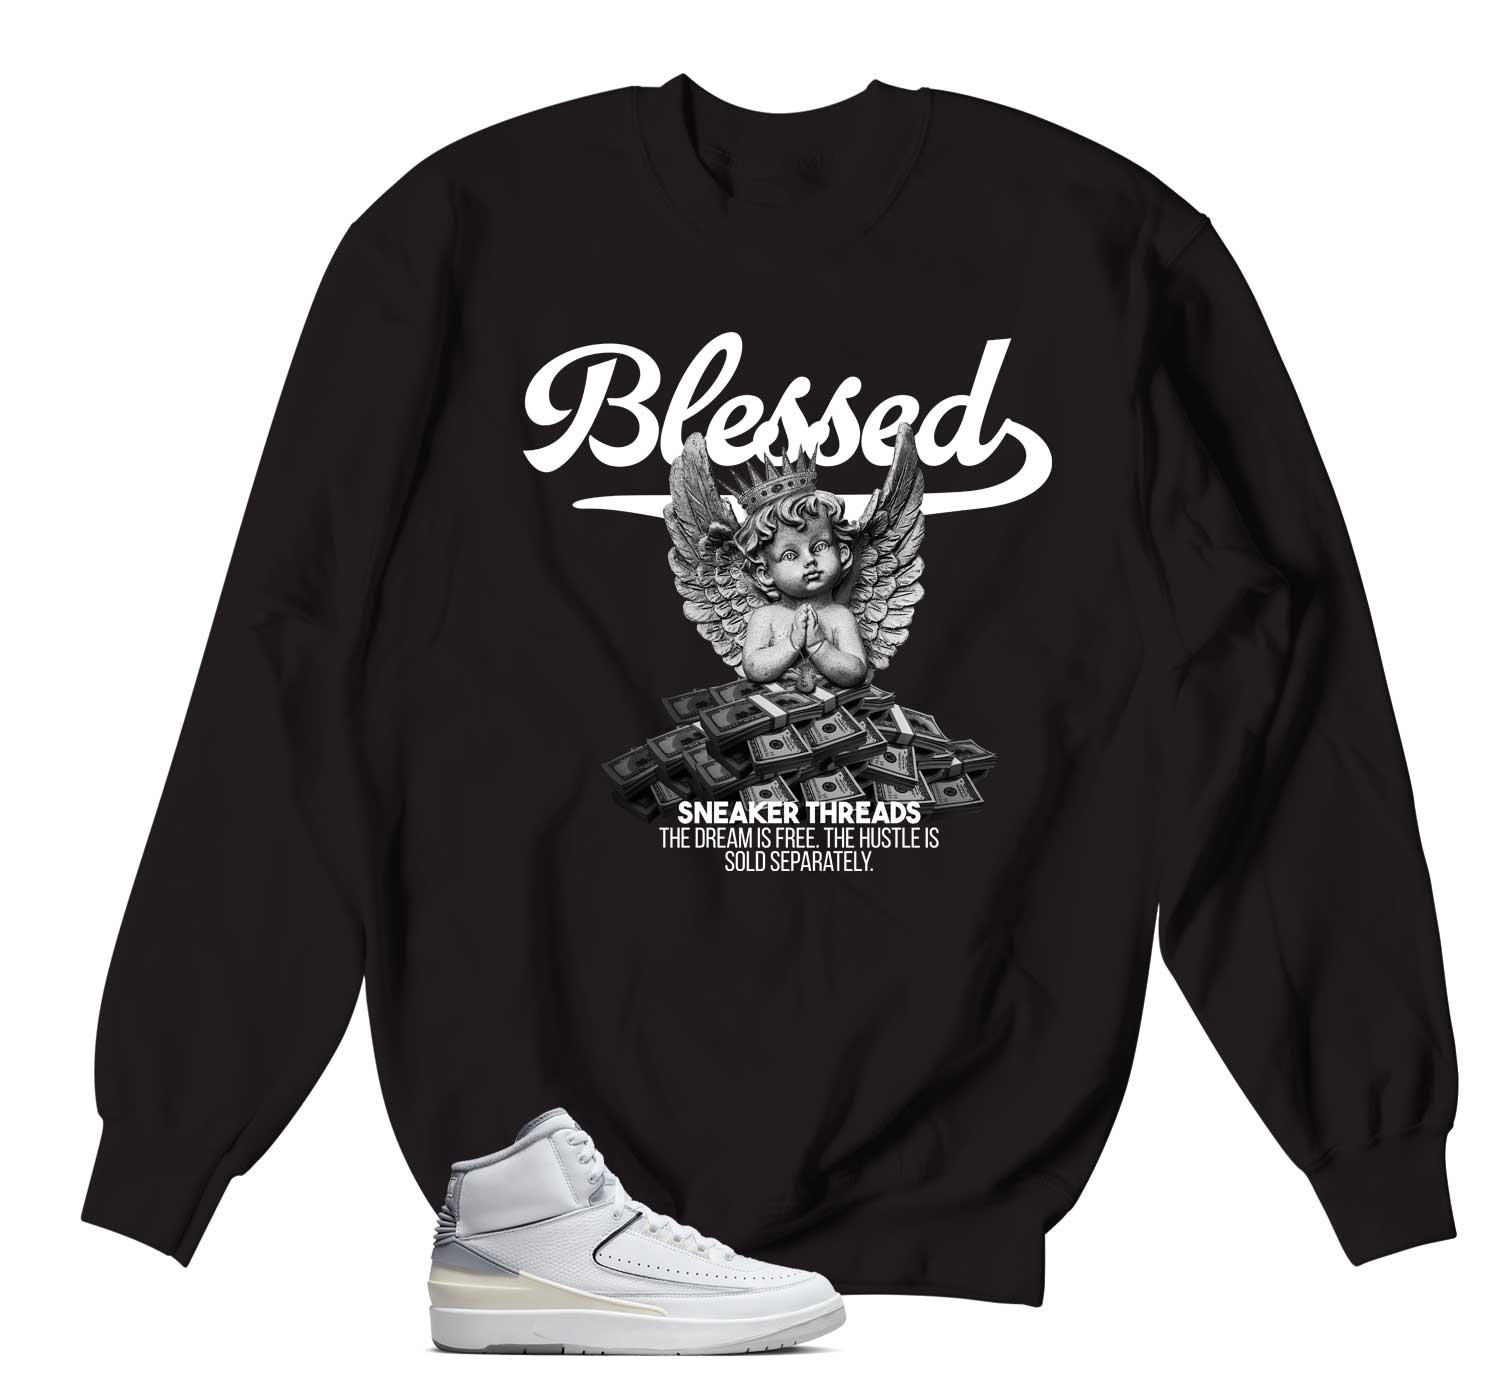 Retro 2 Cement Grey Sweater - Blessed Angel - Black